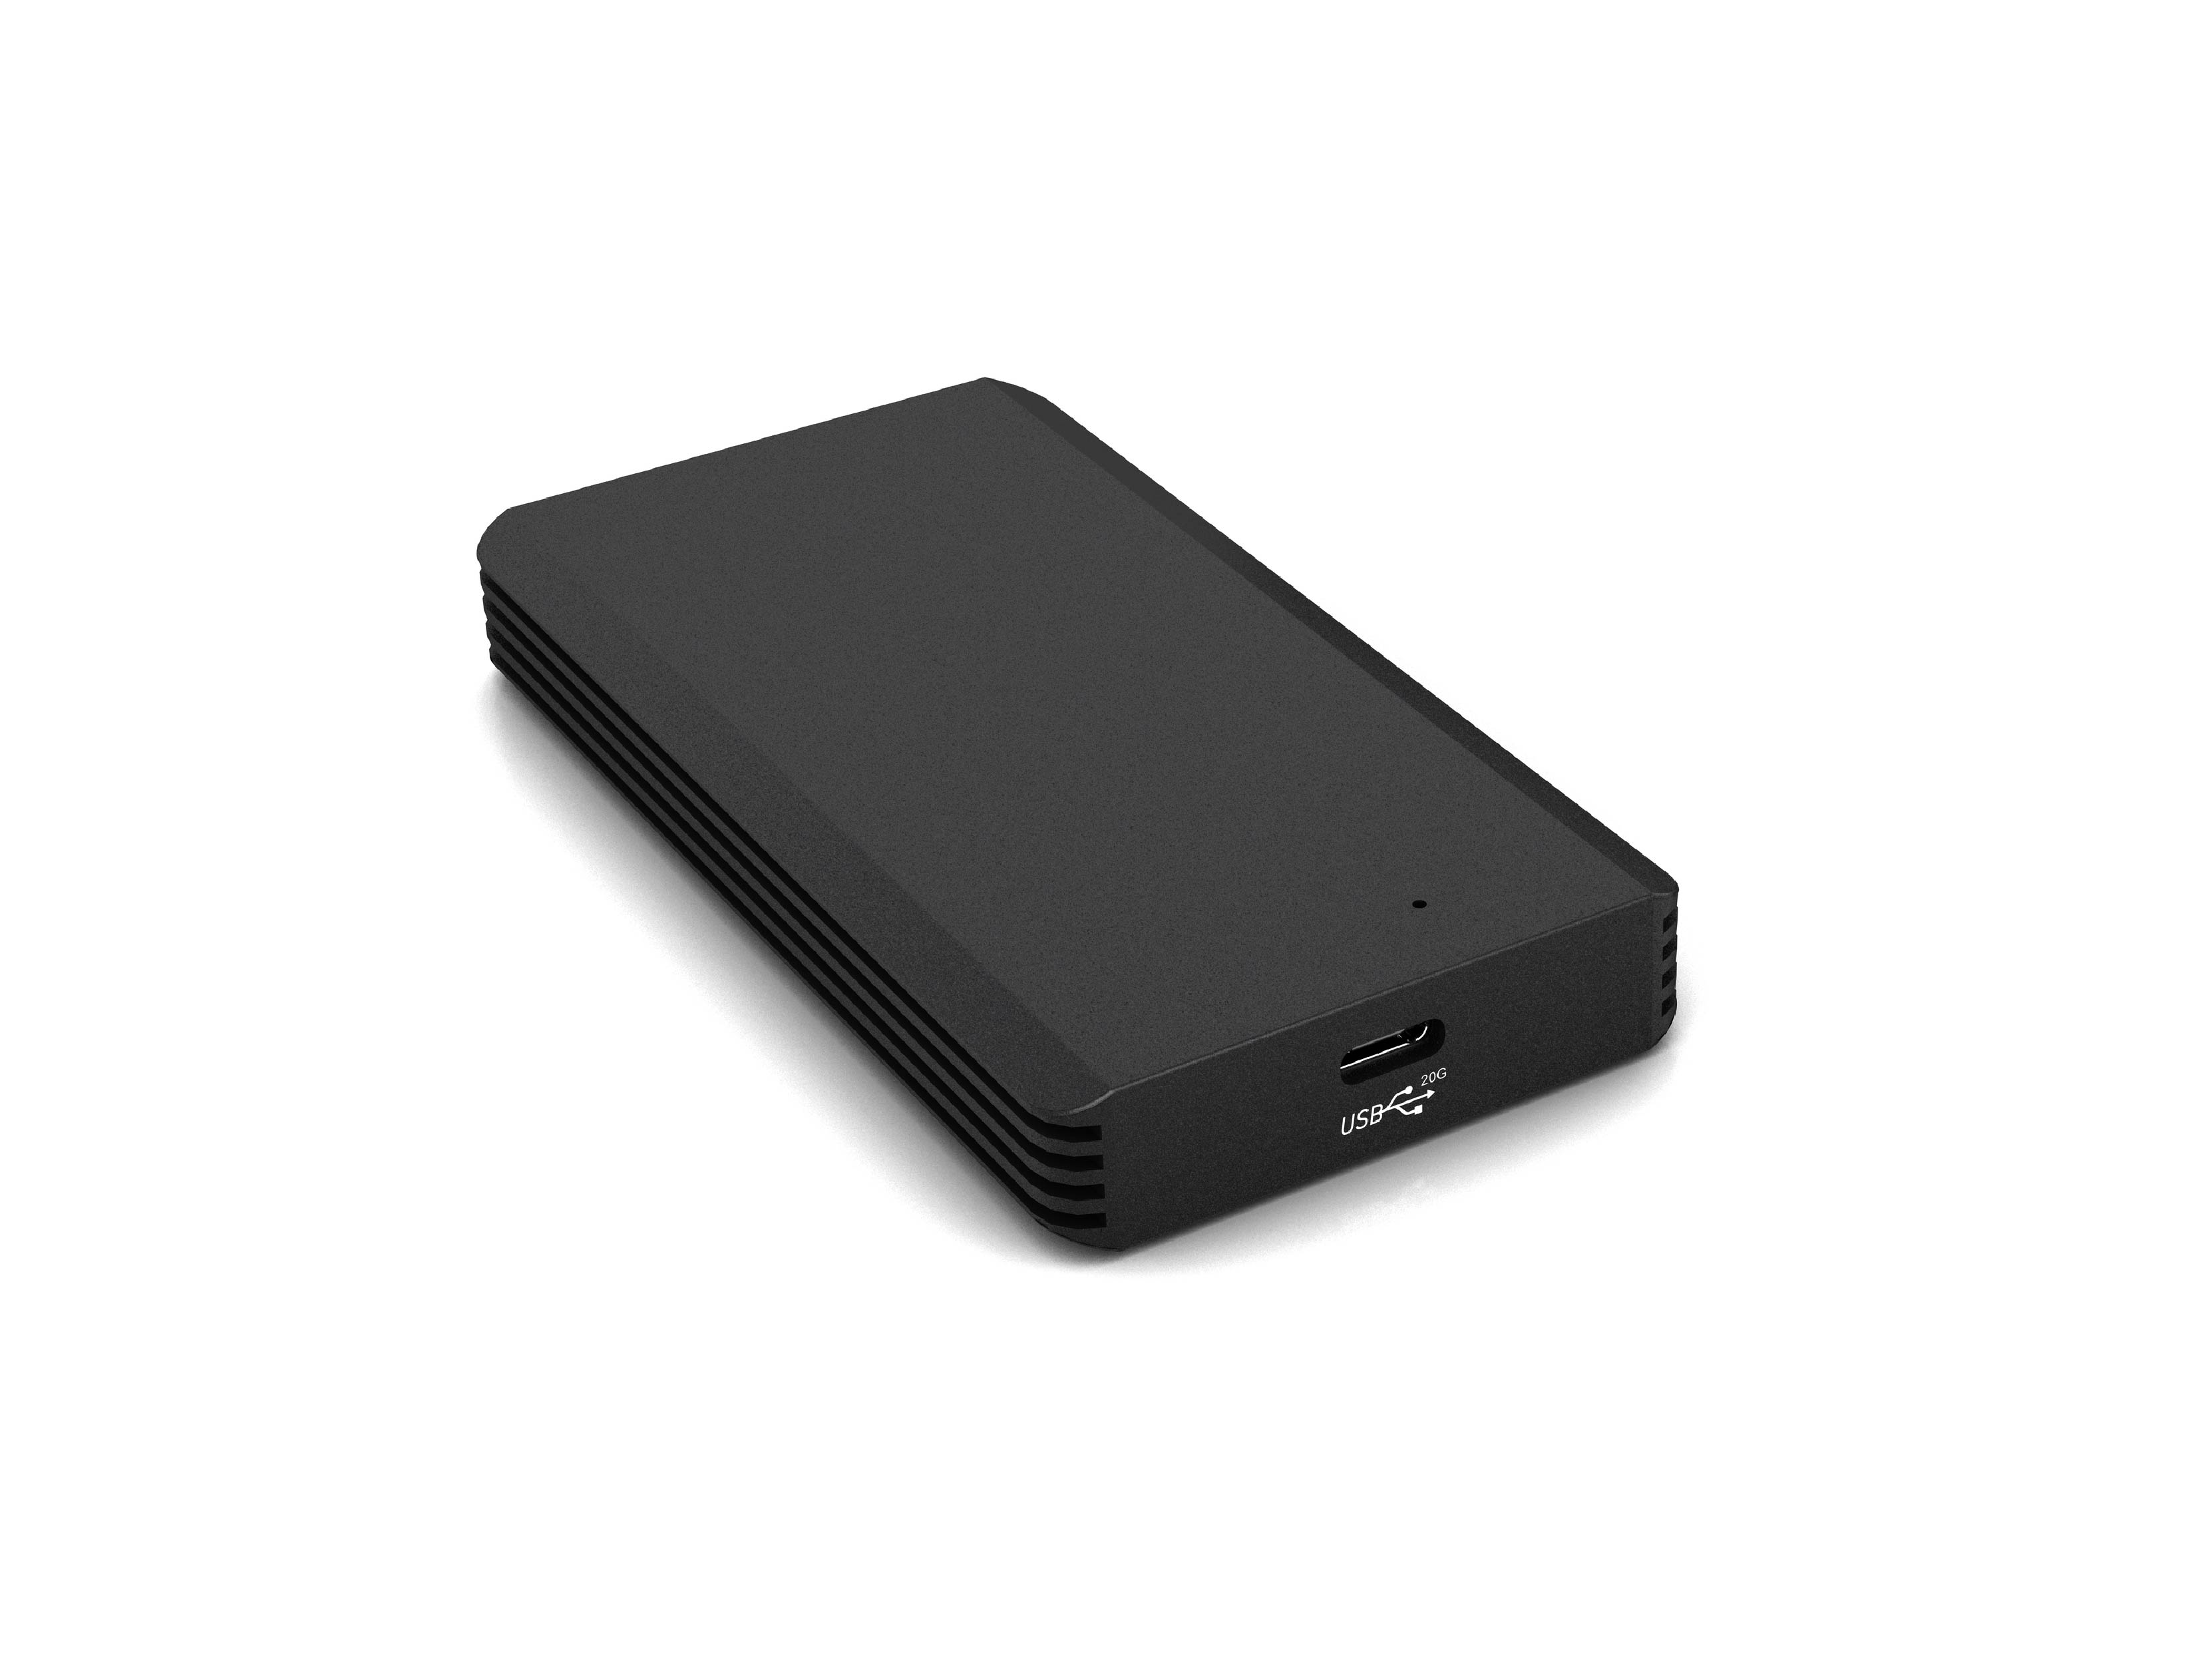 USB-20G M.2 NVMe SSD Enclosure (SI-1821US32C), compatible with 1x M.2 NVMe PCIe SSD, USB3.2 -C 20Gbps to host, portable SSD enclosure, slim and compact.